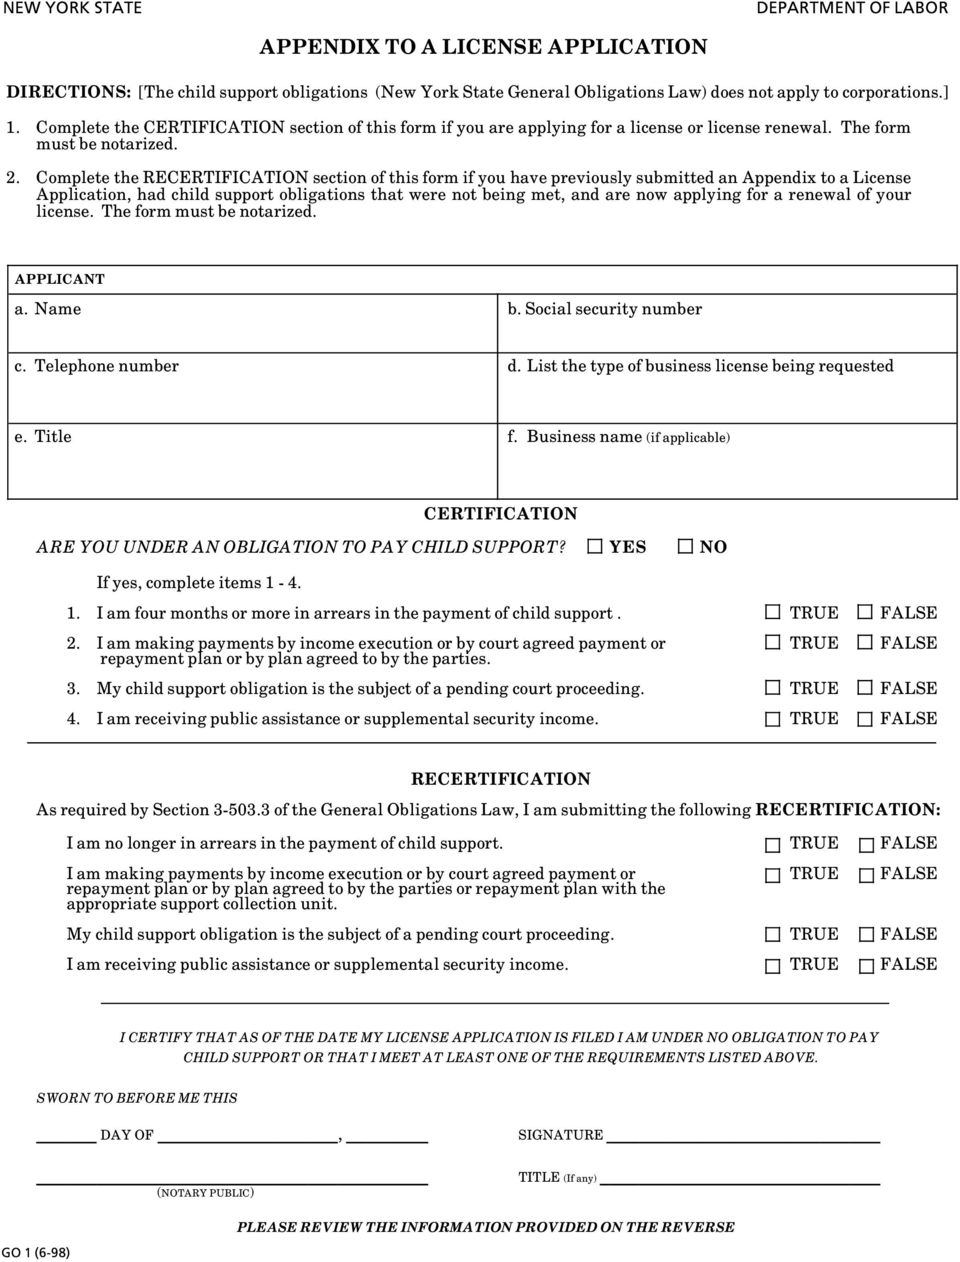 Complete the RECERTIFICATION section of this form if you have previously submitted an Appendix to a License Application, had child support obligations that were not being met, and are now applying